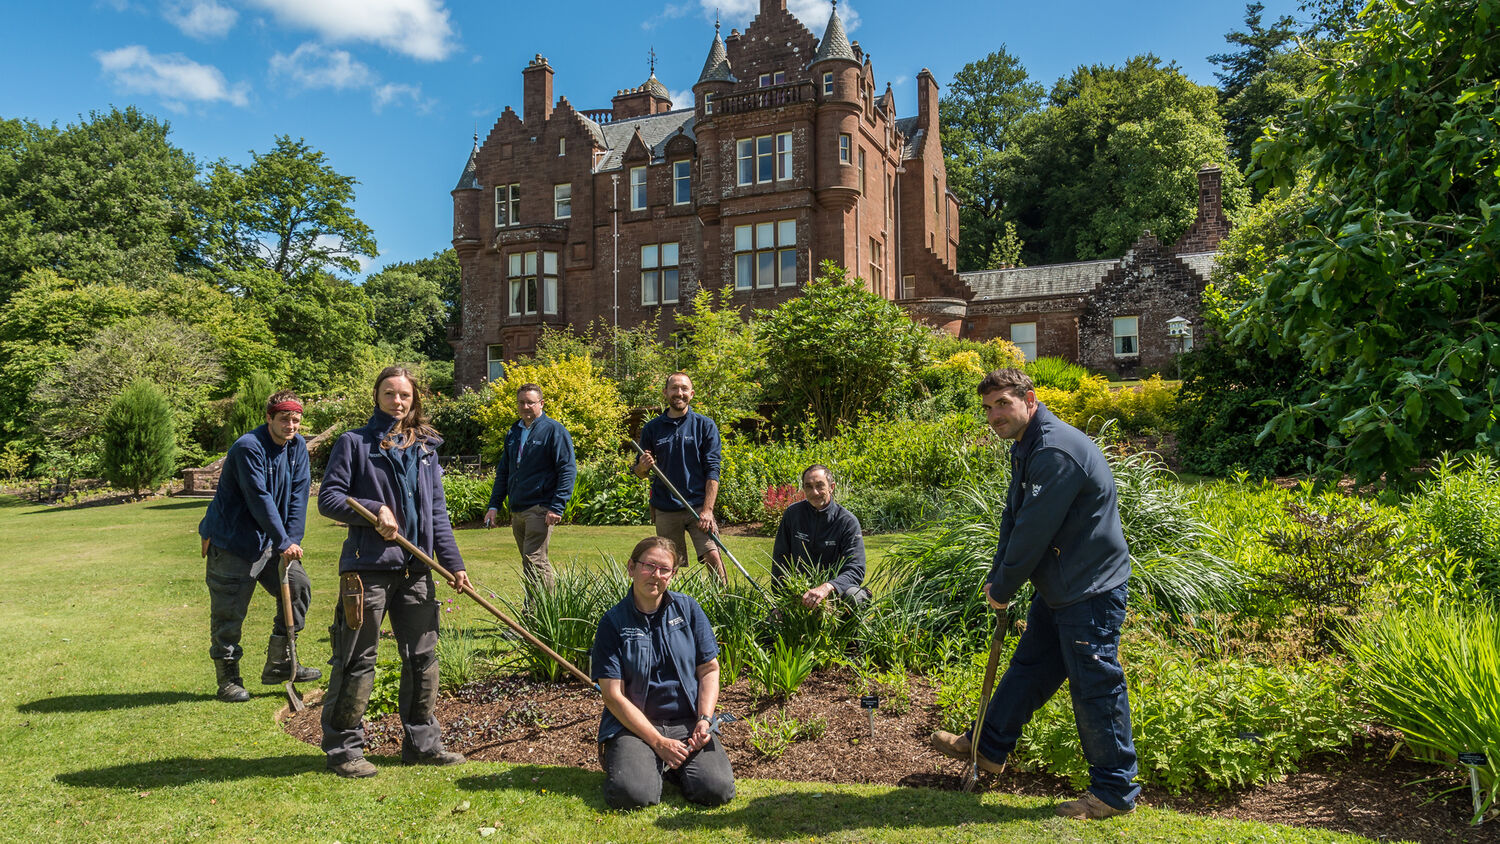 A group of gardeners pose in Threave Garden around a flower bed, with Threave House looming above them! Several are holding hoes or other digging implements.